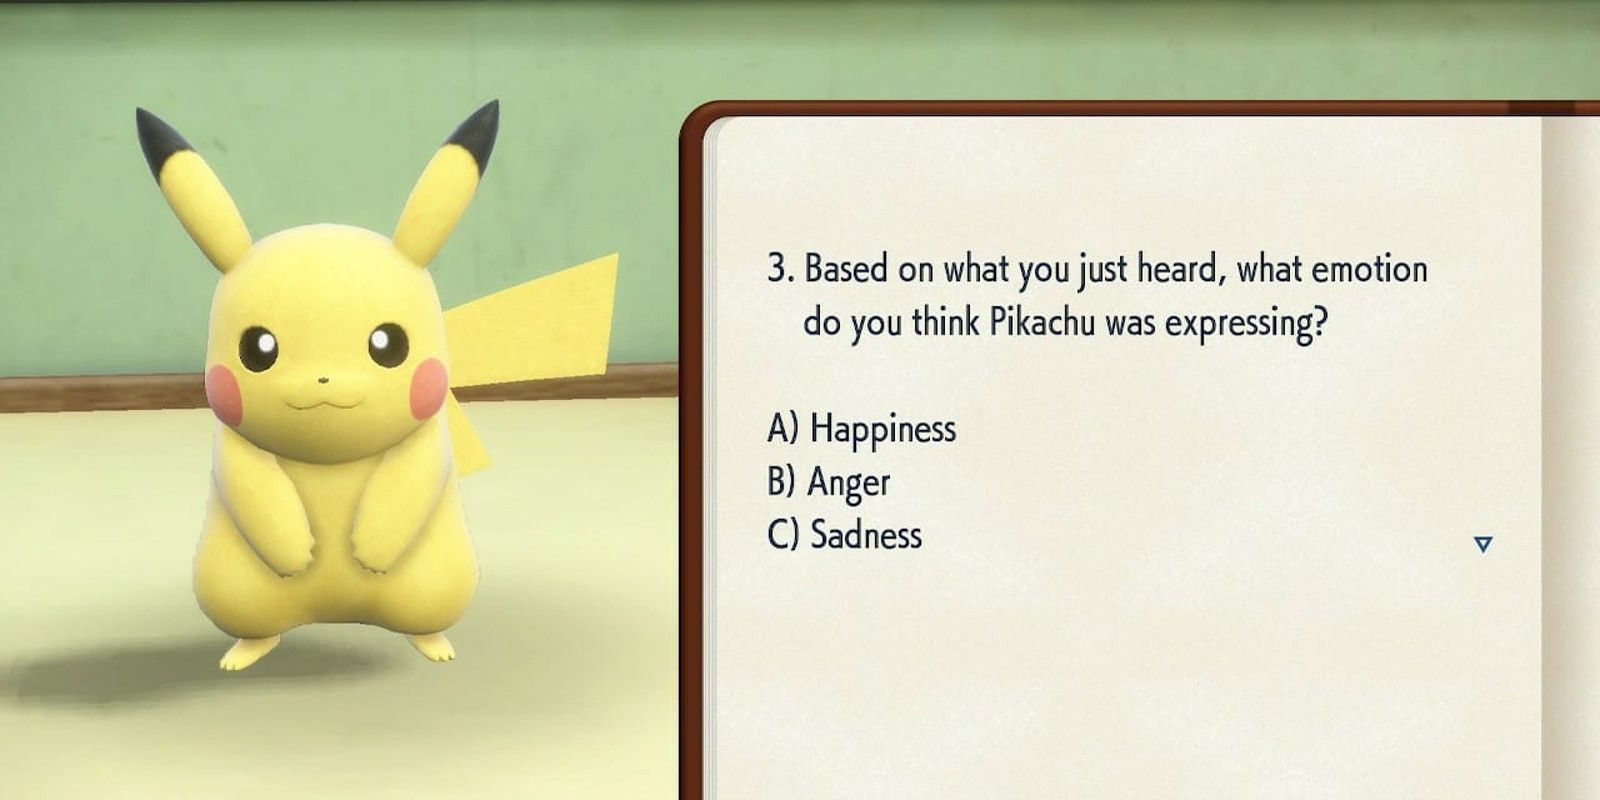 Professor Assistant Pikachu helping Mr. Salvatore in Answers to Pokémon Scarlet and Violet